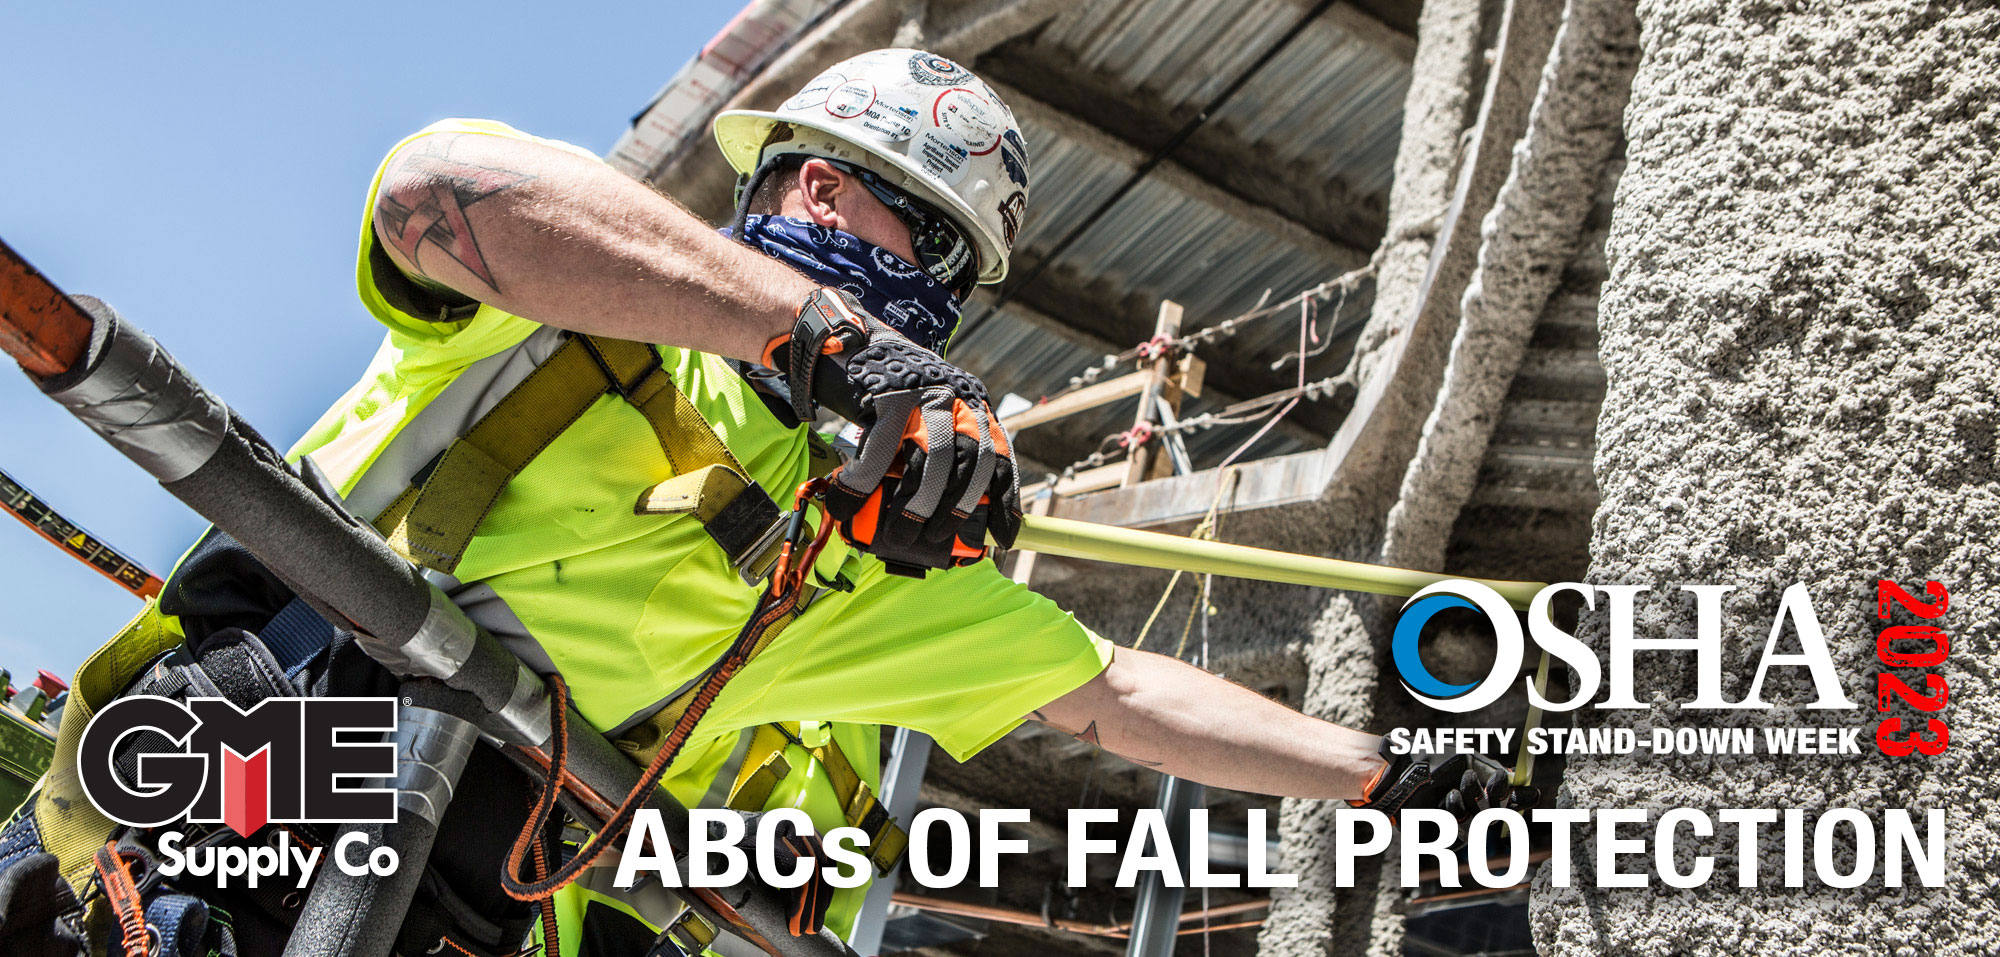 The abcds of fall protection